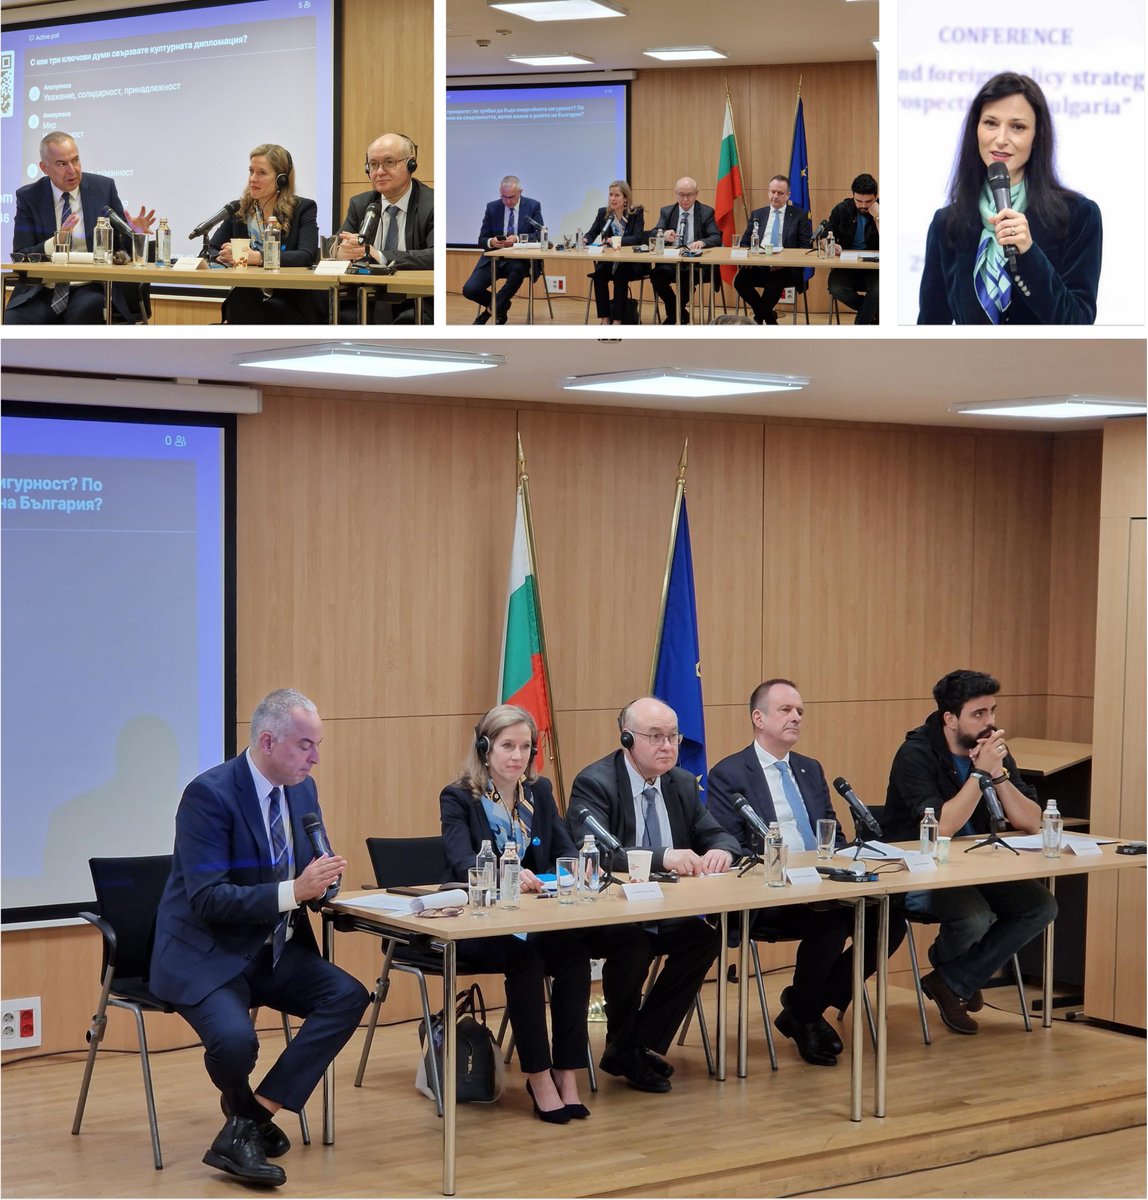 UNICEF joined @MFABulgaria in 🇧🇬's Foreign Policy conference, discussing climate action, AI, digital diplomacy, & fighting misinformation. Thanks @GabrielMariya for leadership. @ChristinaDeBruin stressed putting children at the center of global decisions, urging joint action.